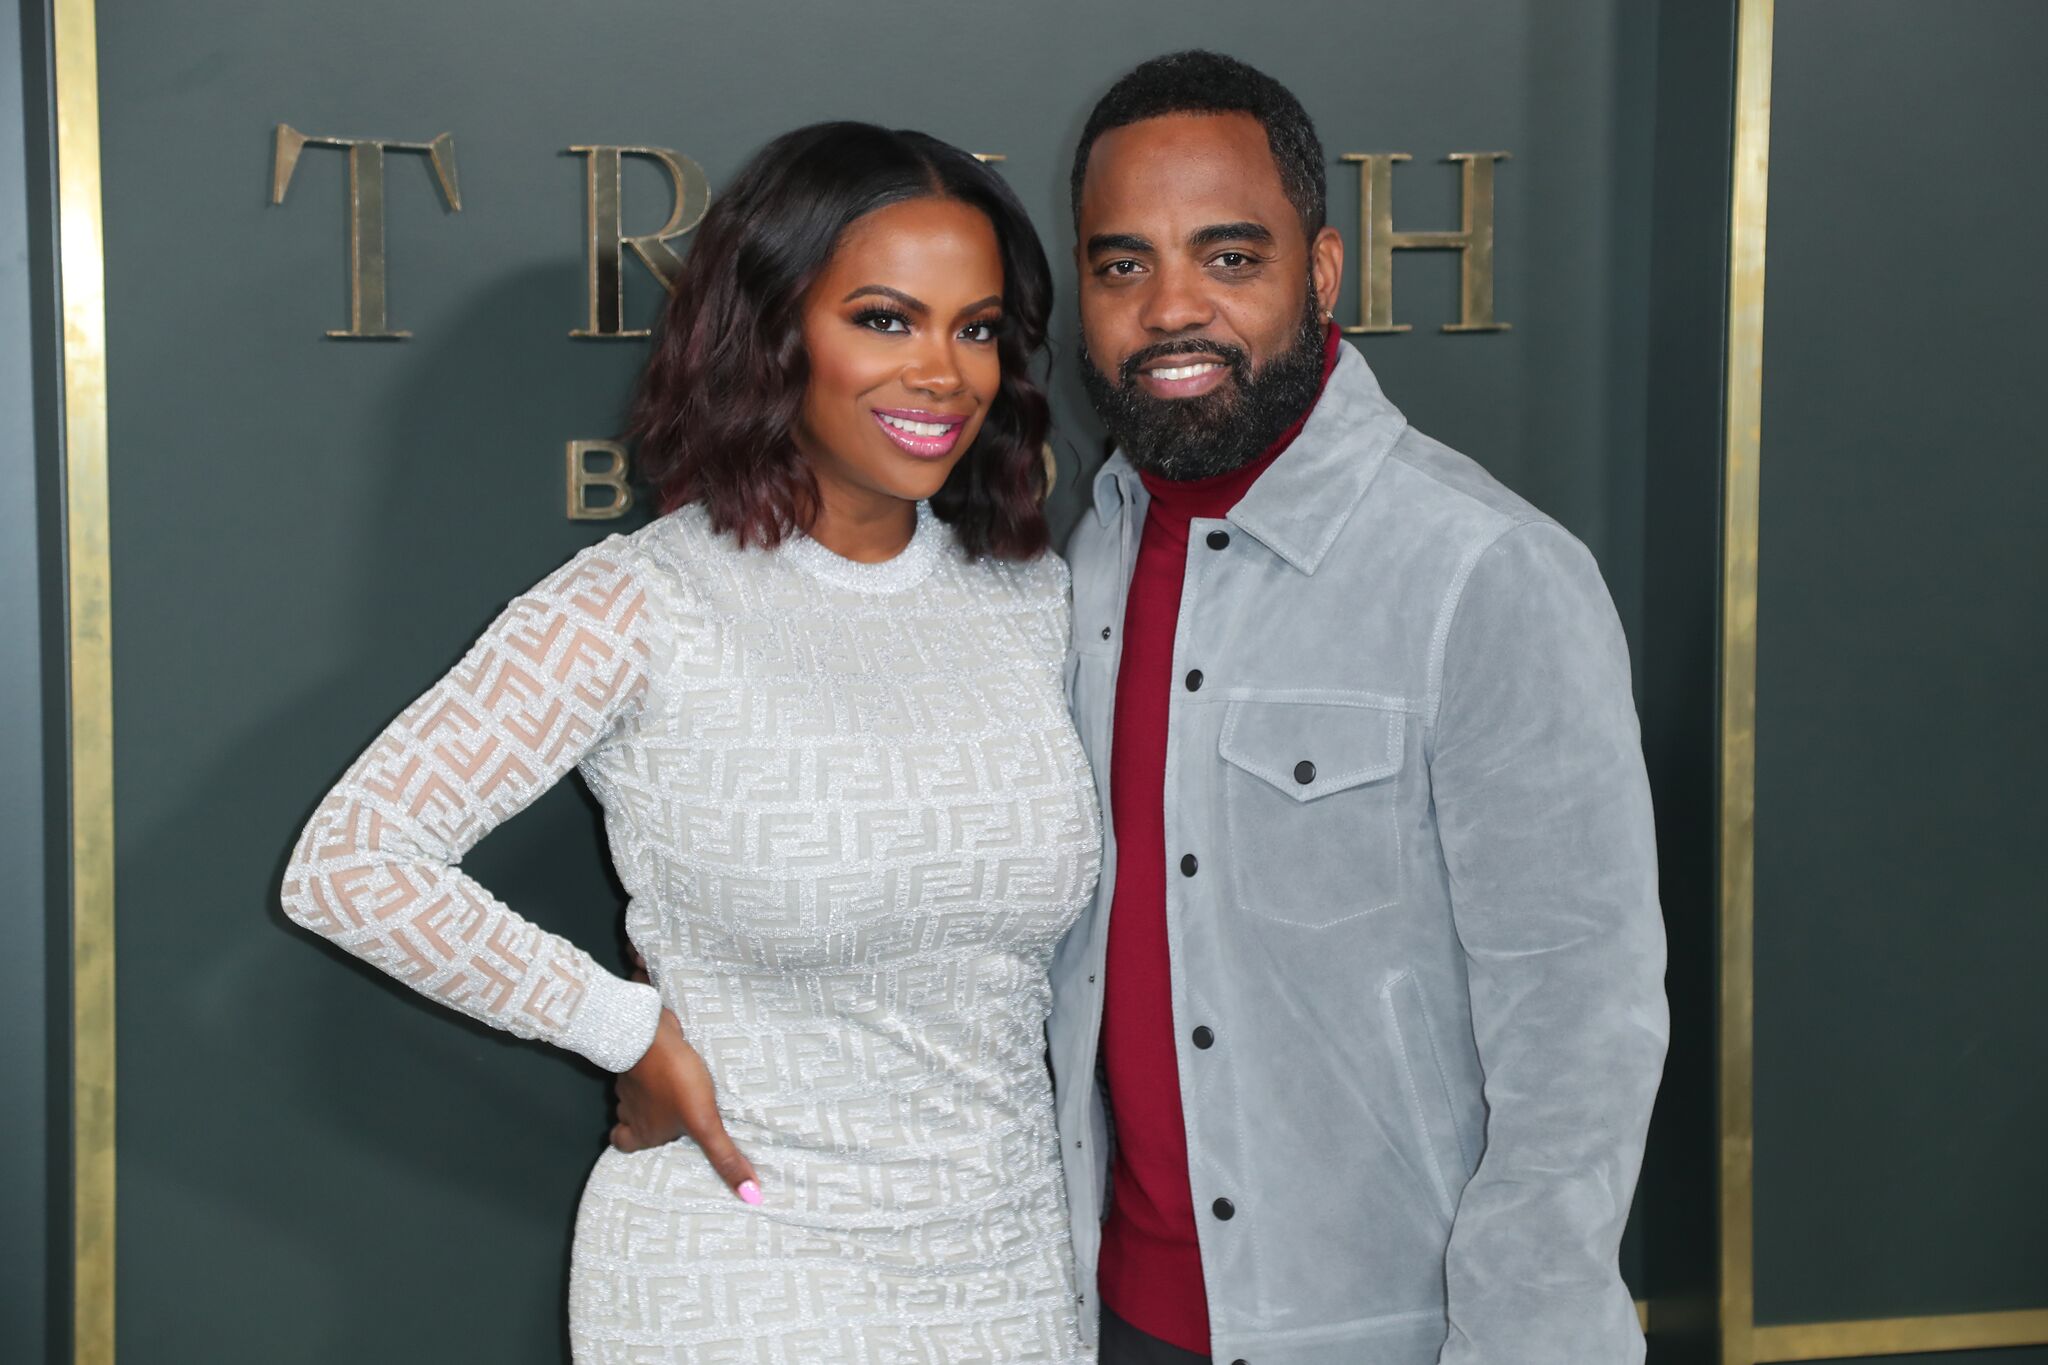 Kandi Burruss and Todd Tucker attend Premiere Of Apple TV+'s "Truth Be Told" at AMPAS Samuel Goldwyn Theater on November 11, 2019  | Photo: Getty Images